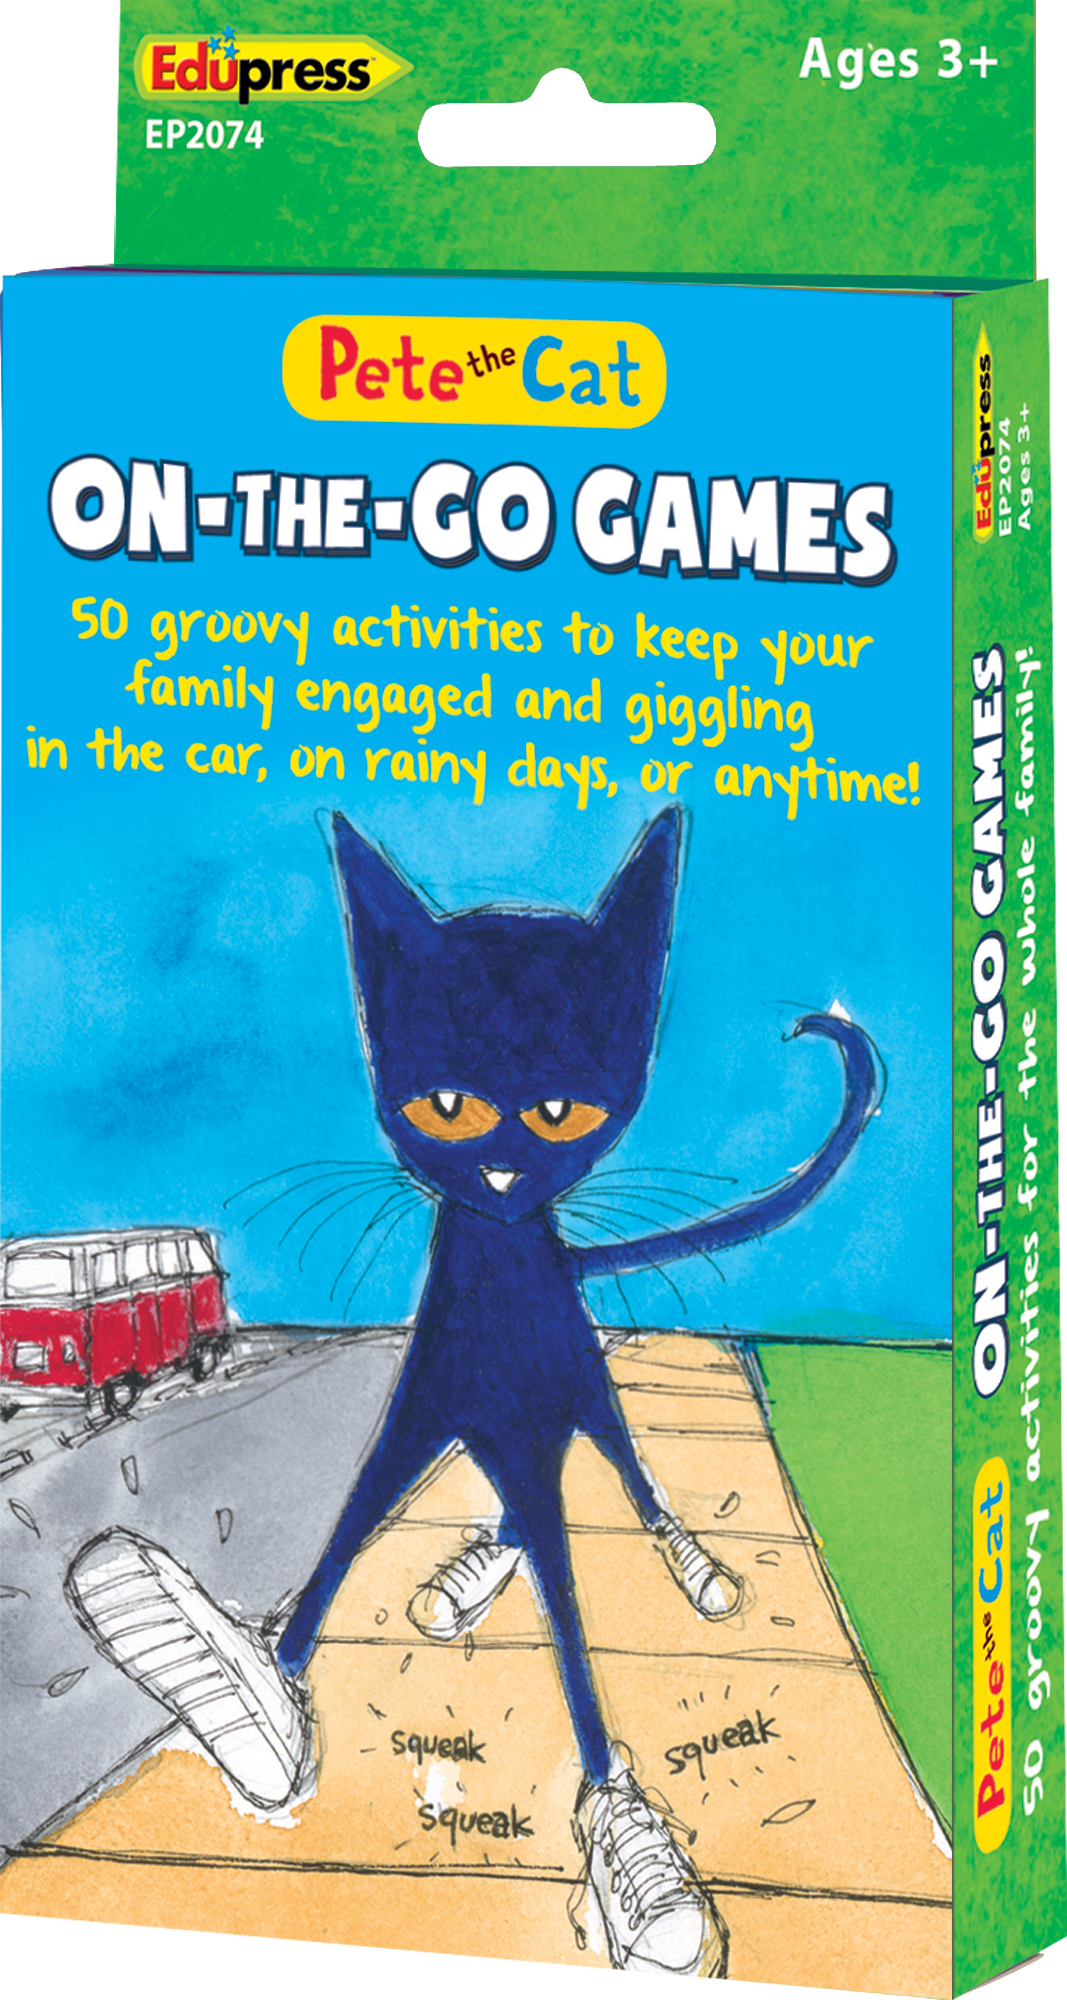 Pete the CatÂ® On-the-Go Games